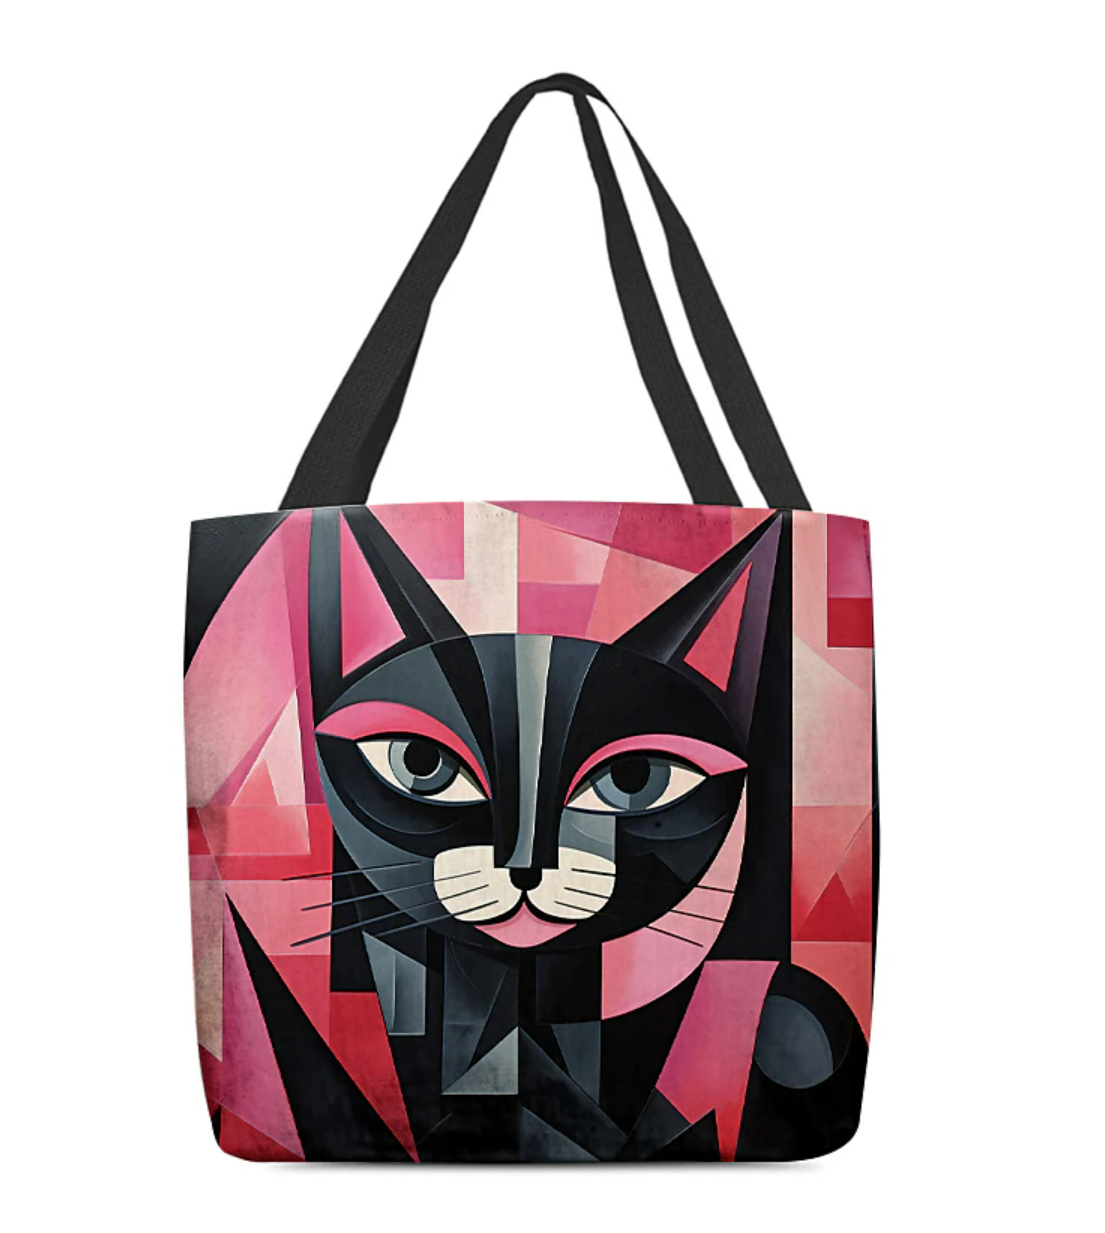 Women's Tote Shoulder Bag Canvas Tote Bag Polyester Shopping Holiday Print Large Capacity Foldable Lightweight Cat Black / Red Light Pink Light Red